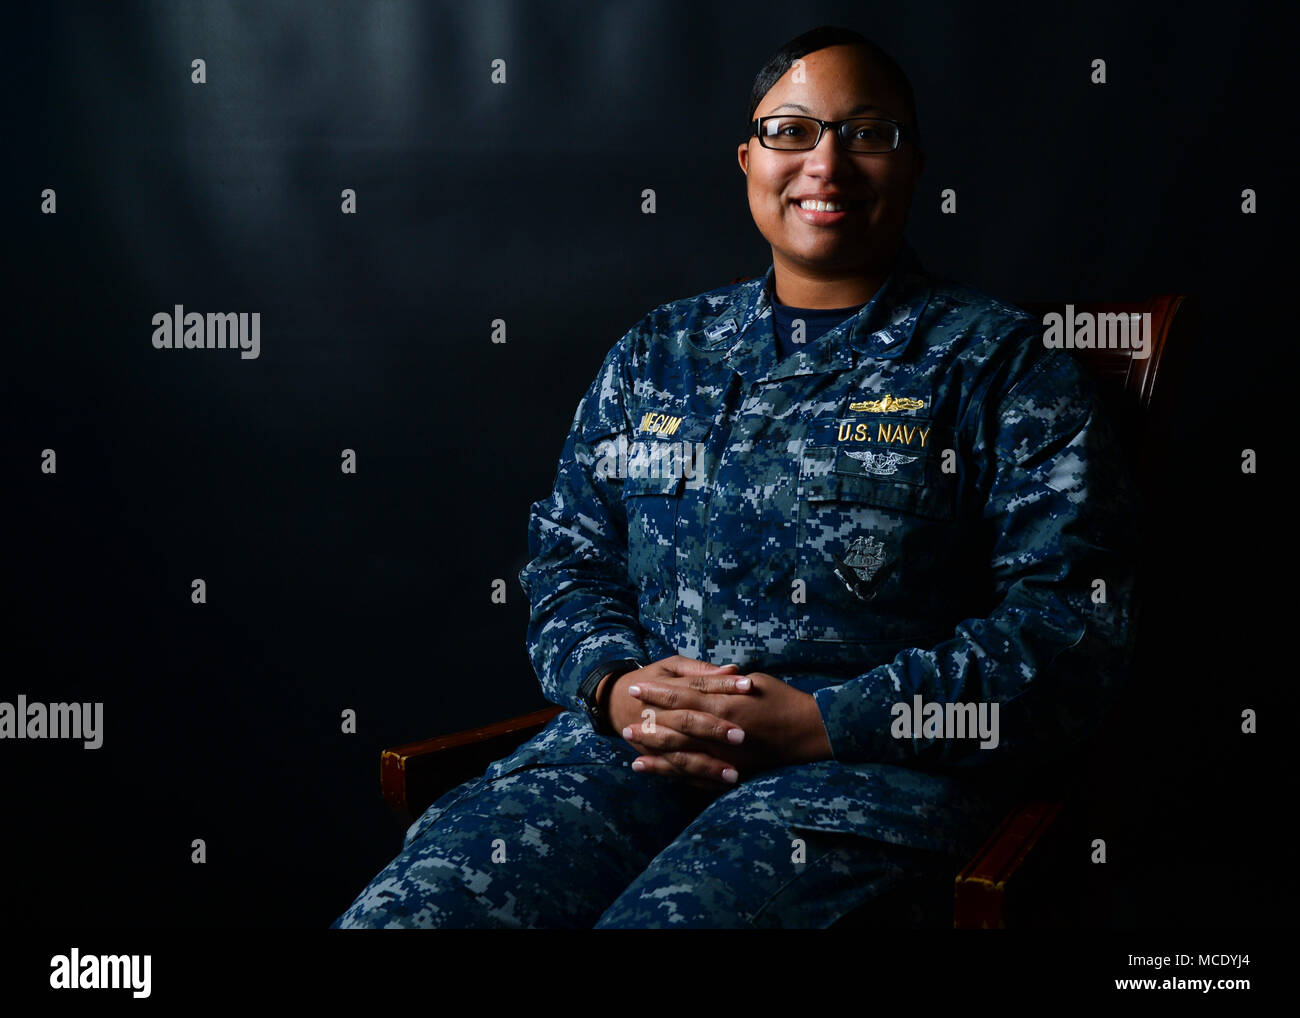 180215-N-OT701-028  NAVAL BASE KITSAP-BREMERTON, Wash. (Feb. 23, 2018) Lt. j.g. Erika Mecum, from Dallas, Texas, the assistant first lieutenant in deck department aboard the aircraft carrier USS Nimitz (CVN 68), poses for a picture aboard the Nimitz. Nimitz is currently preparing for a docking-planned incremental availability at Puget Sound Naval Shipyard and Intermediate Maintenance Facility where the ship will receive scheduled maintenance and upgrades. (U.S. Navy photo by Mass Communication Specialist Seaman Greg Hall) Stock Photo